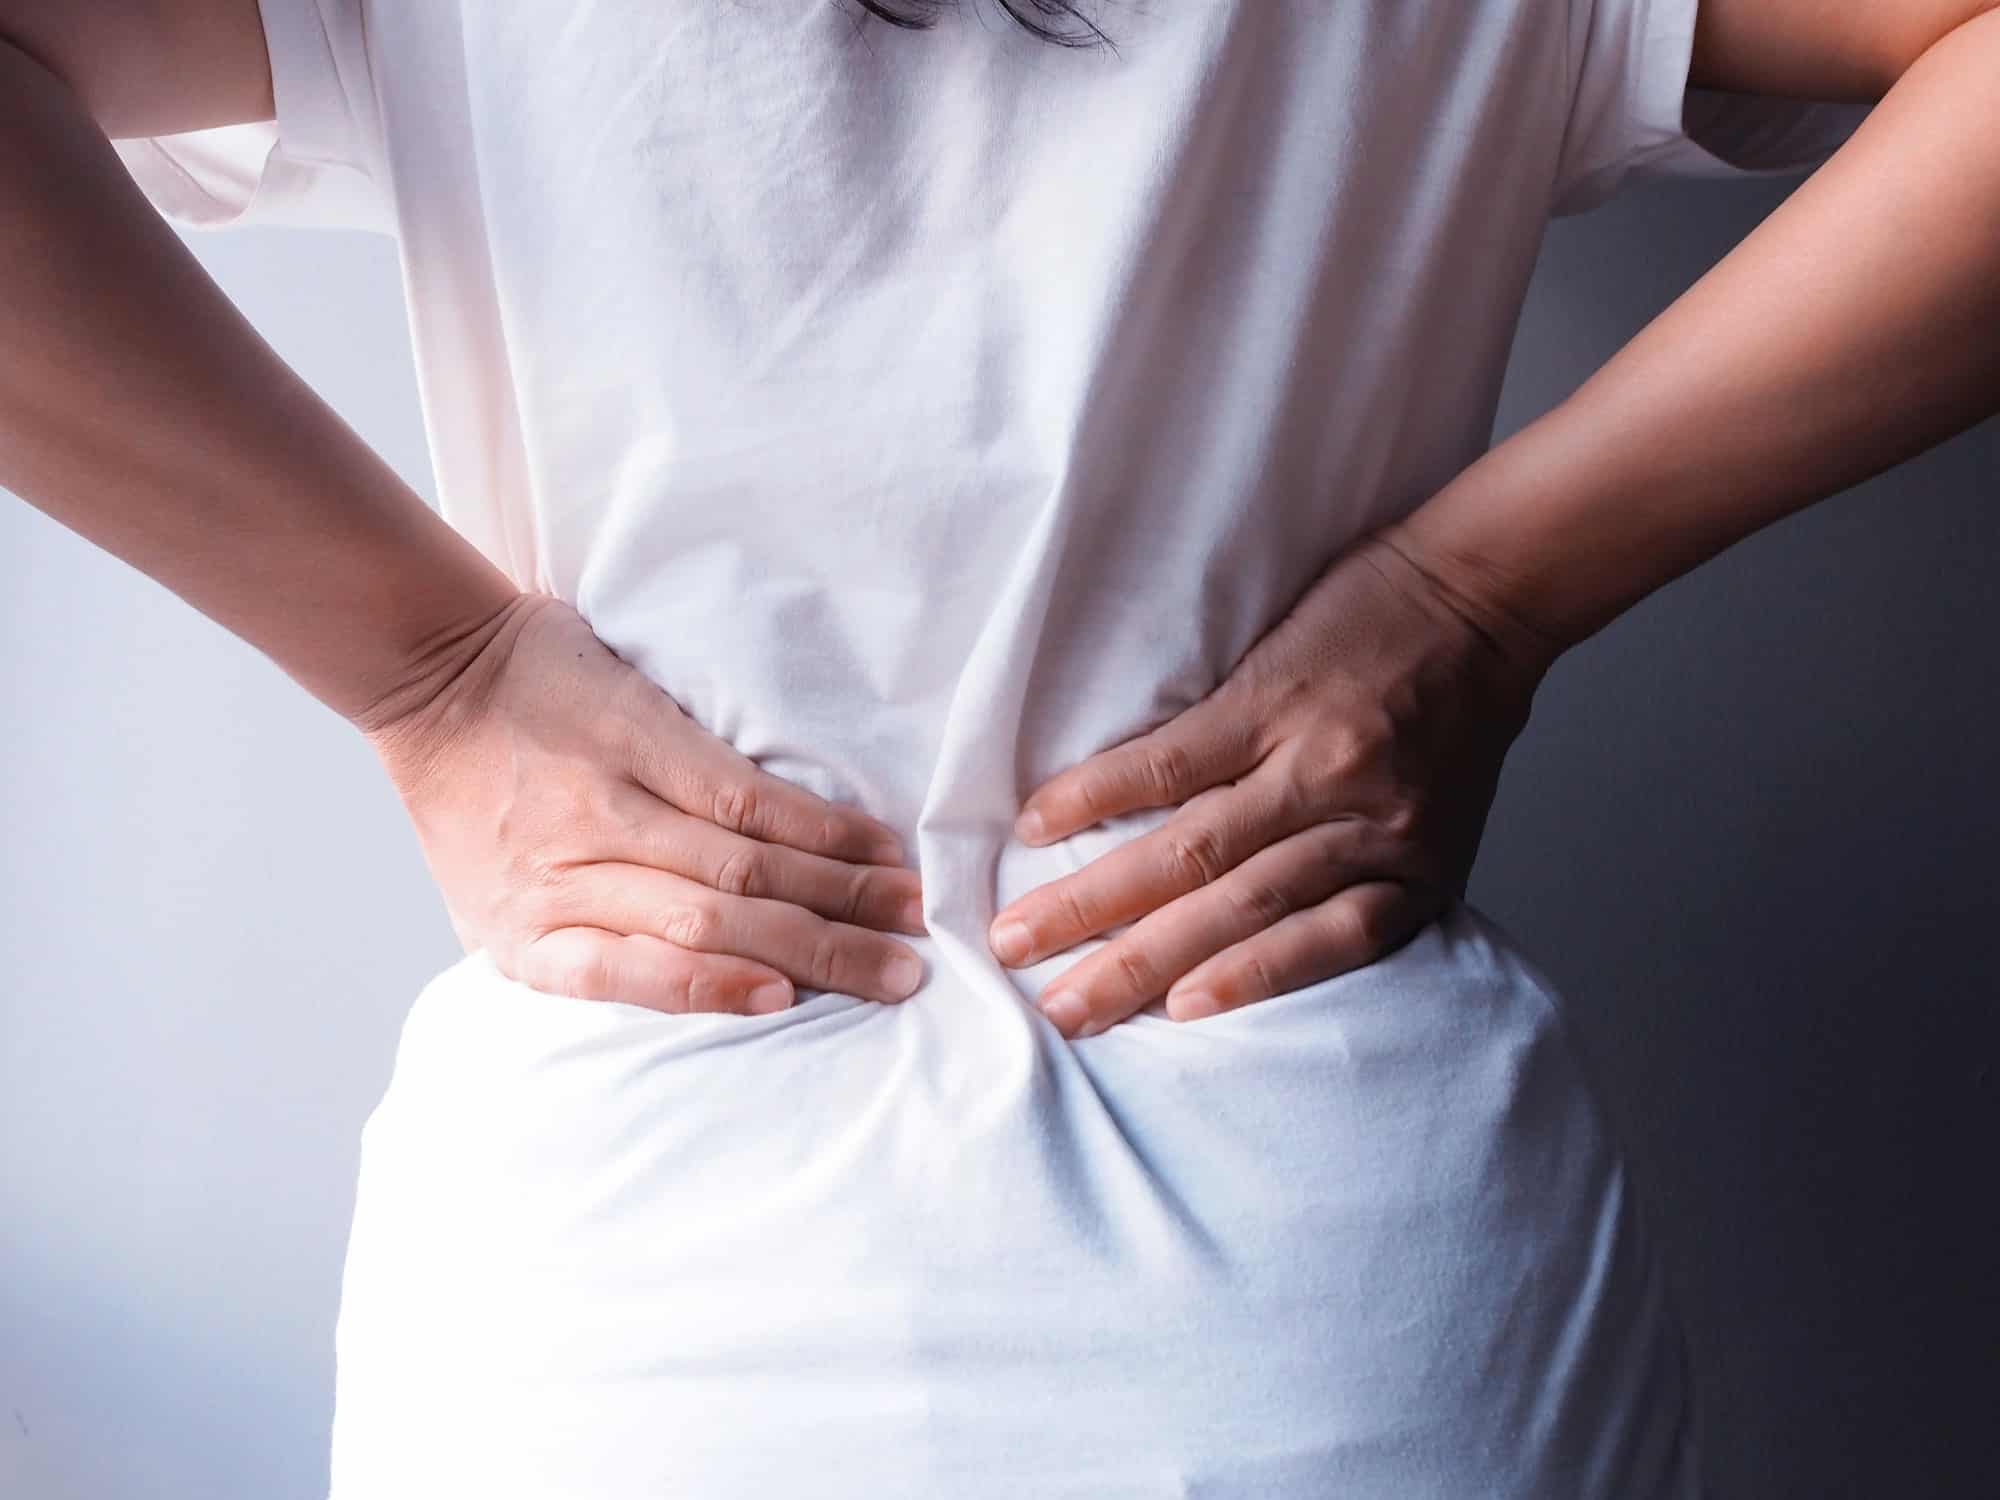 Asian woman suffering from back pain and waist, Have symptoms muscle injury or chronic nerve pain.